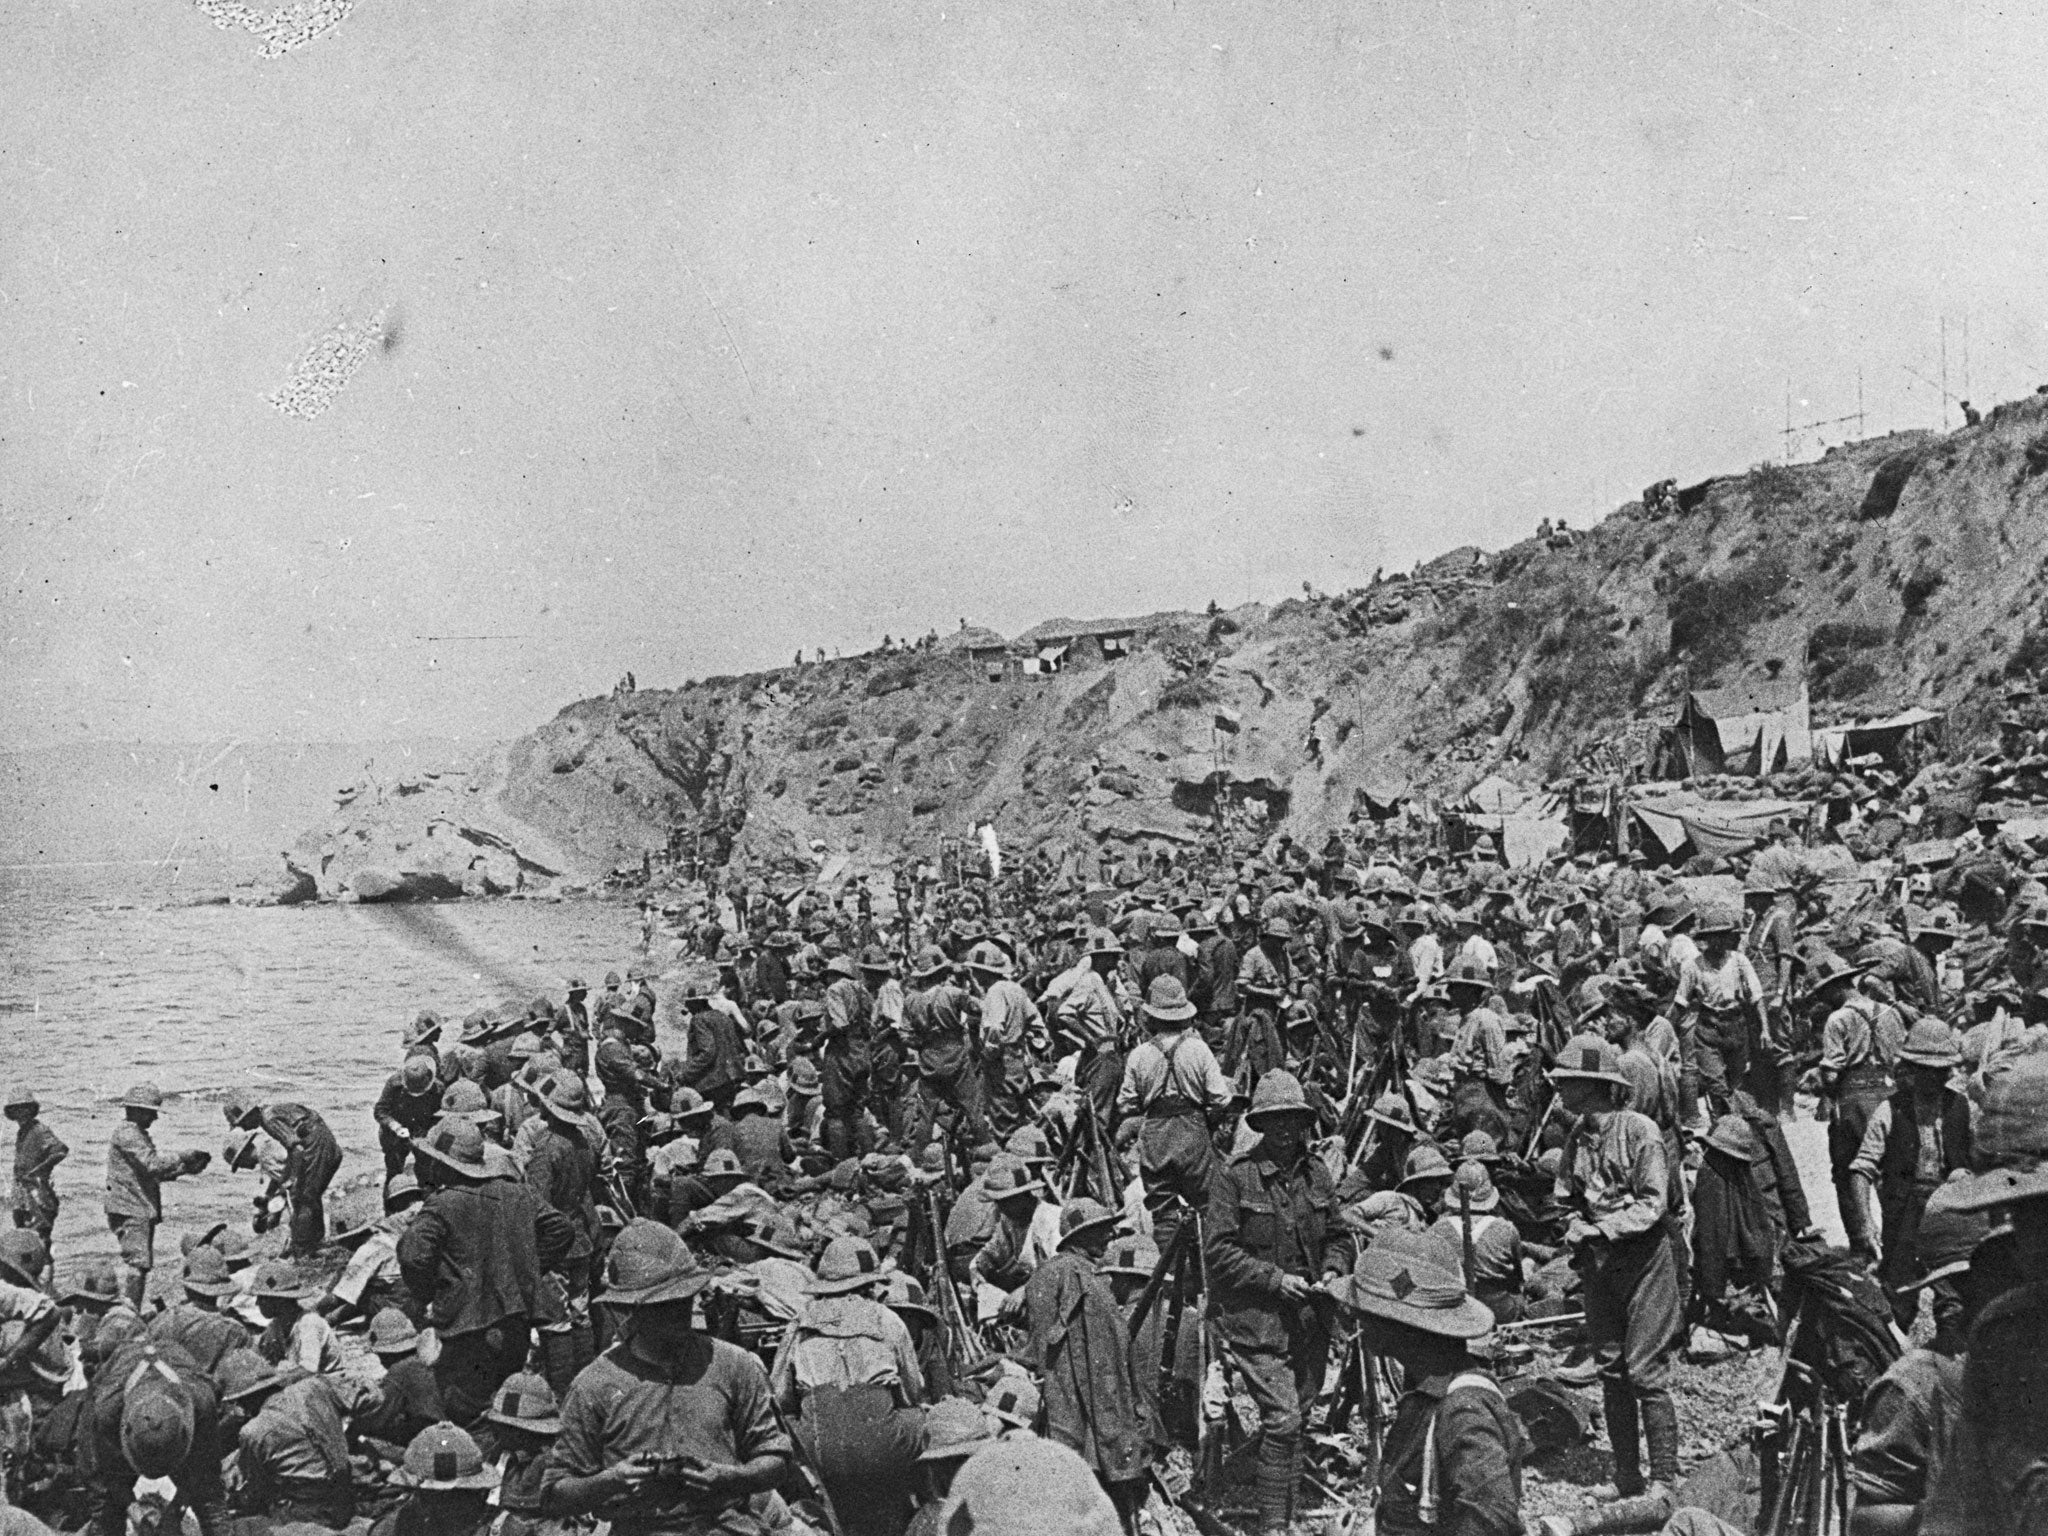 British troops after landing at Suvla on the Aegean coast of the Gallipoli peninsula in Turkey, before the August offensive